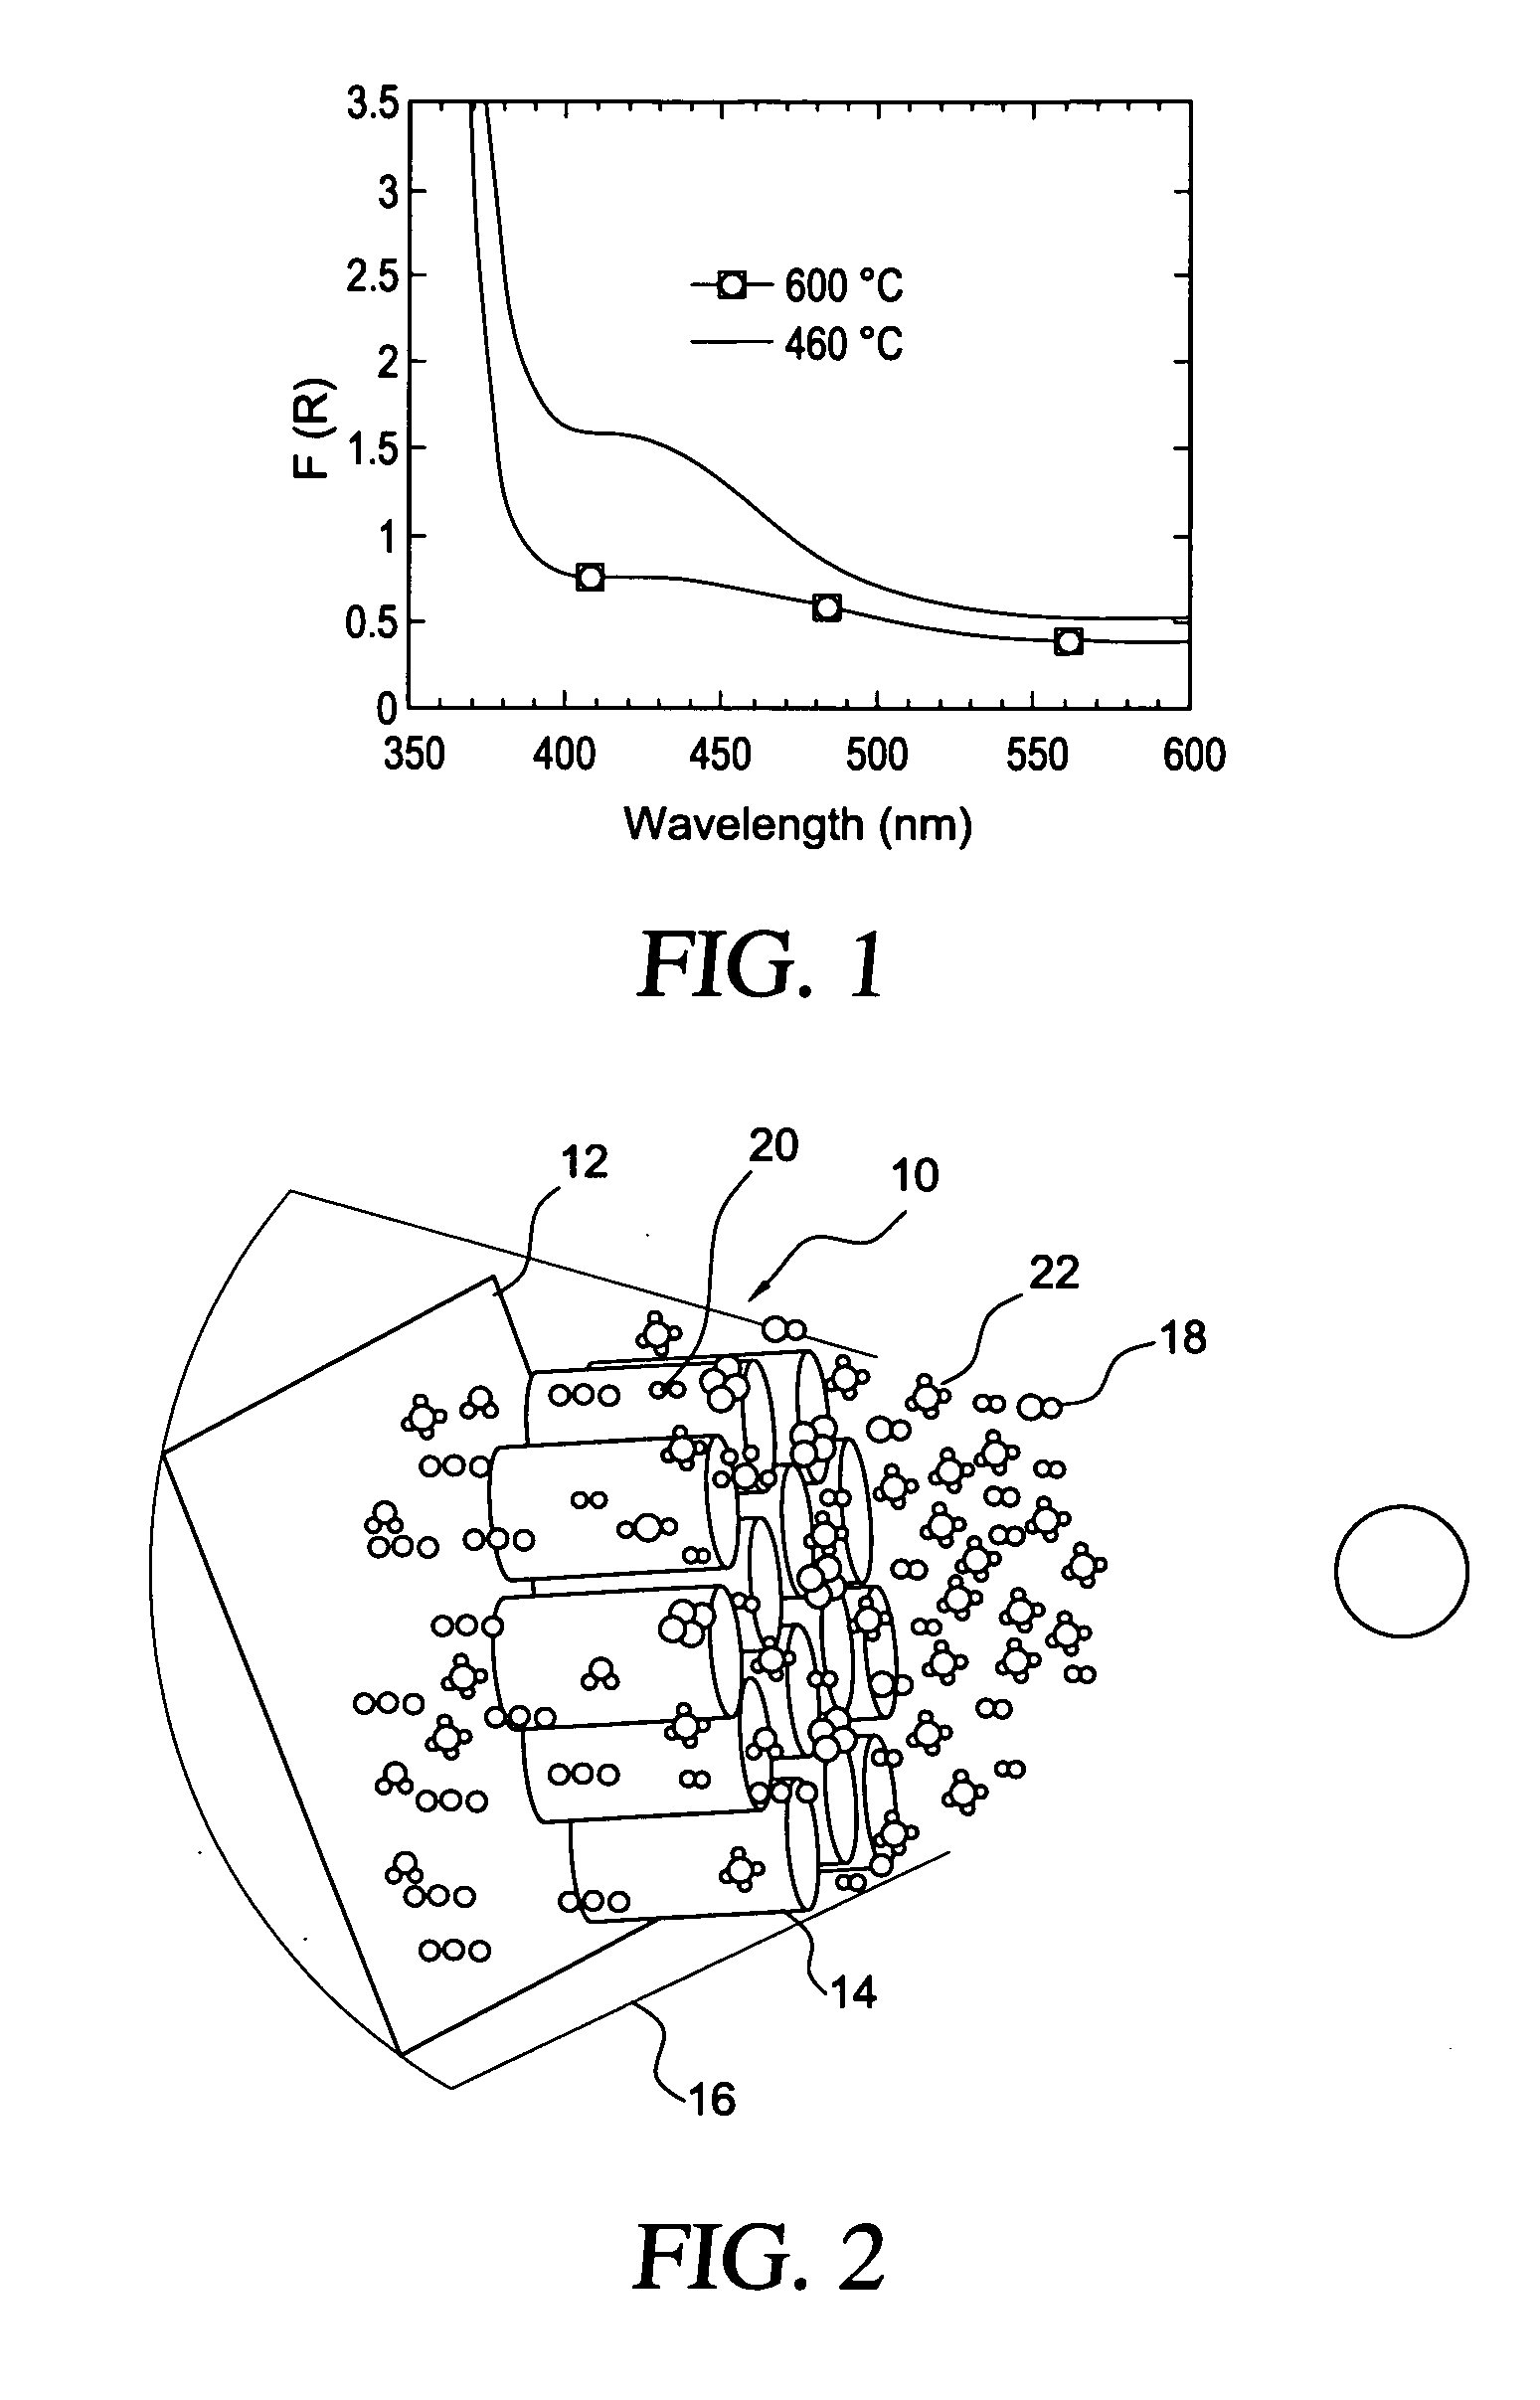 Titania nanotube arrays, methods of manufacture, and photocatalytic conversion of carbon dioxide using same